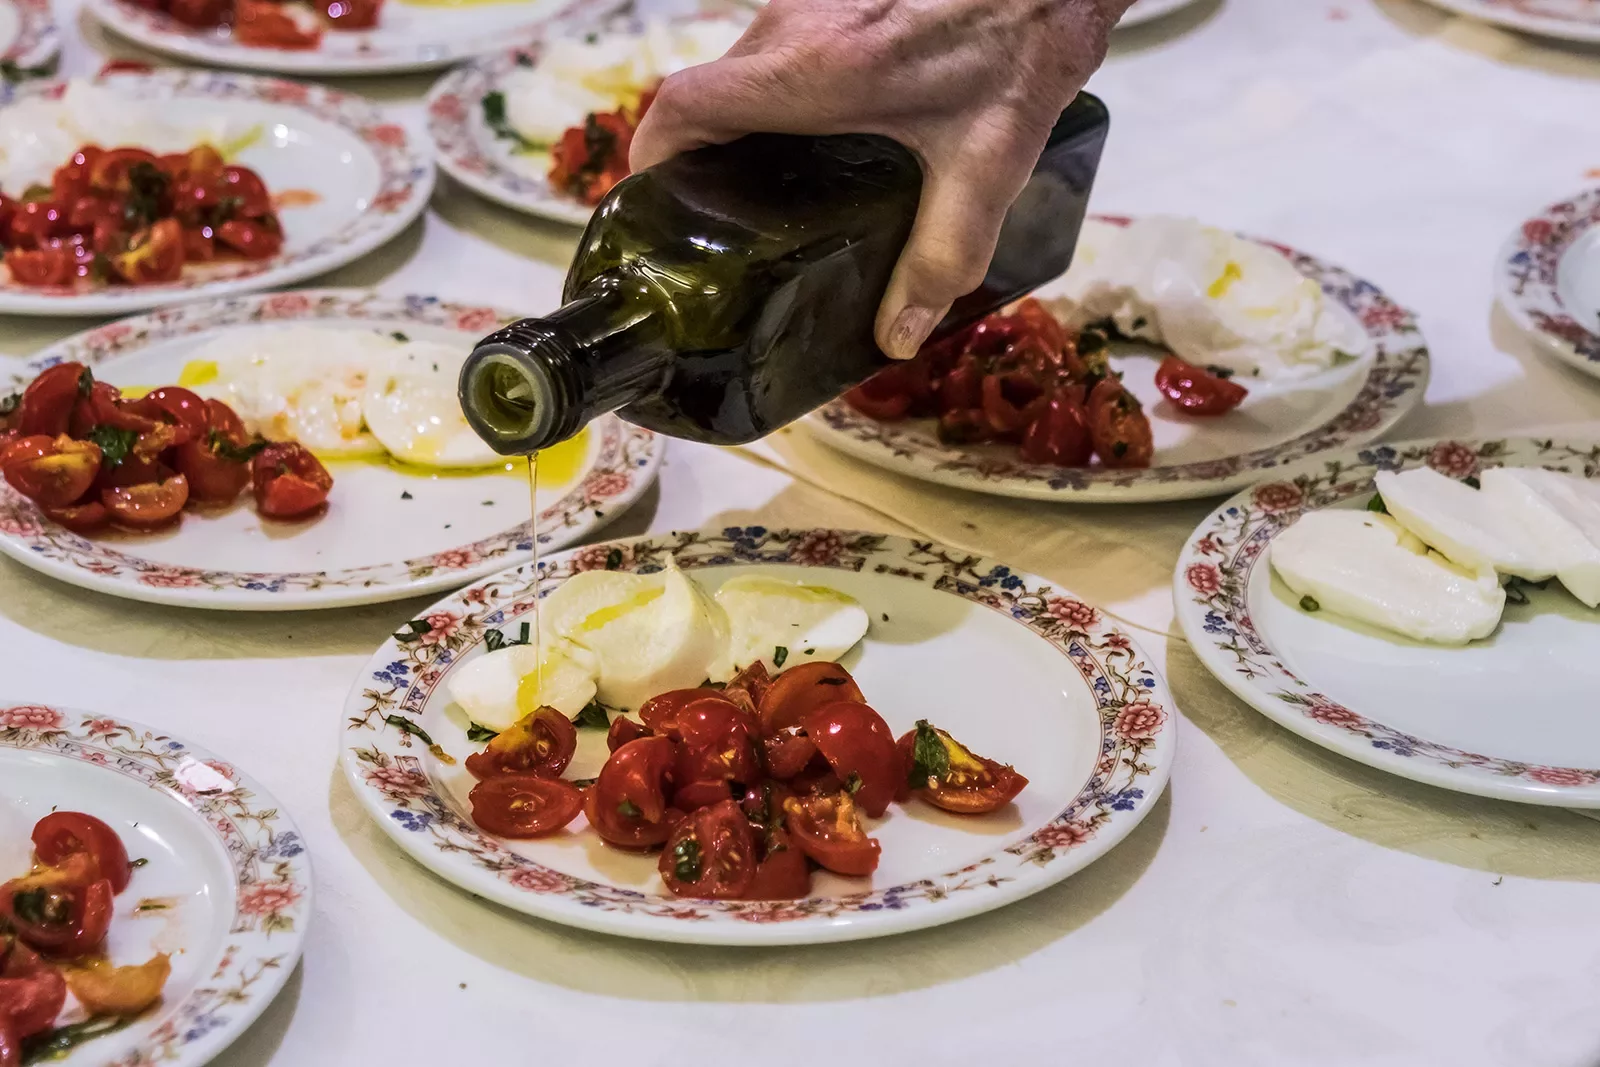 Plates of caprese salad, hand pouring olive oil.